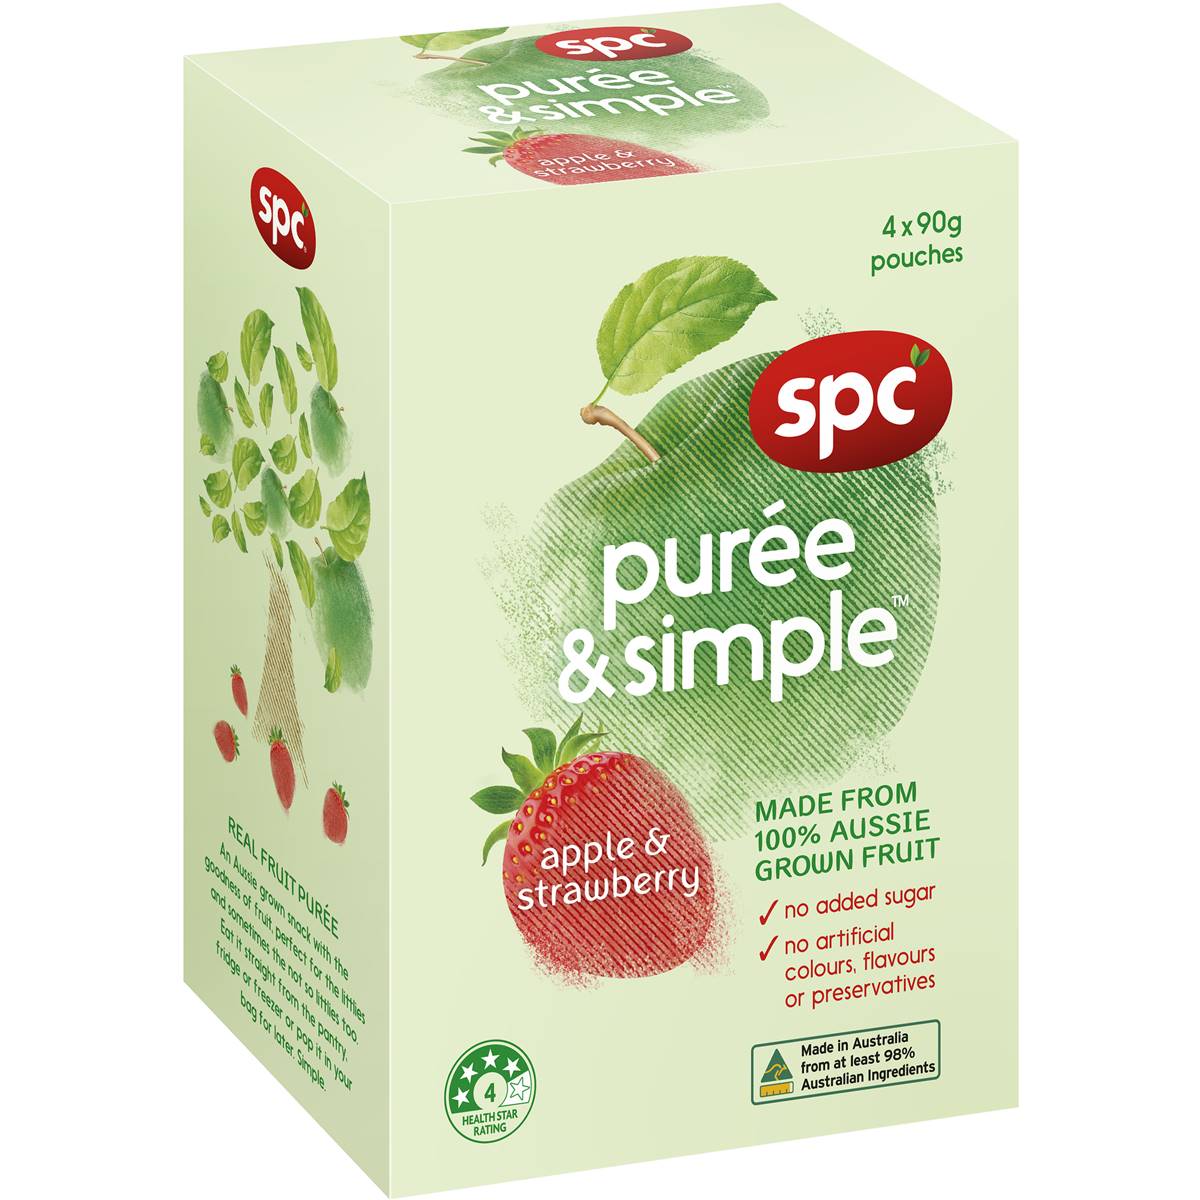 Calories in Spc Puree & Simple Apple & Strawberry Fruit Puree Pouch